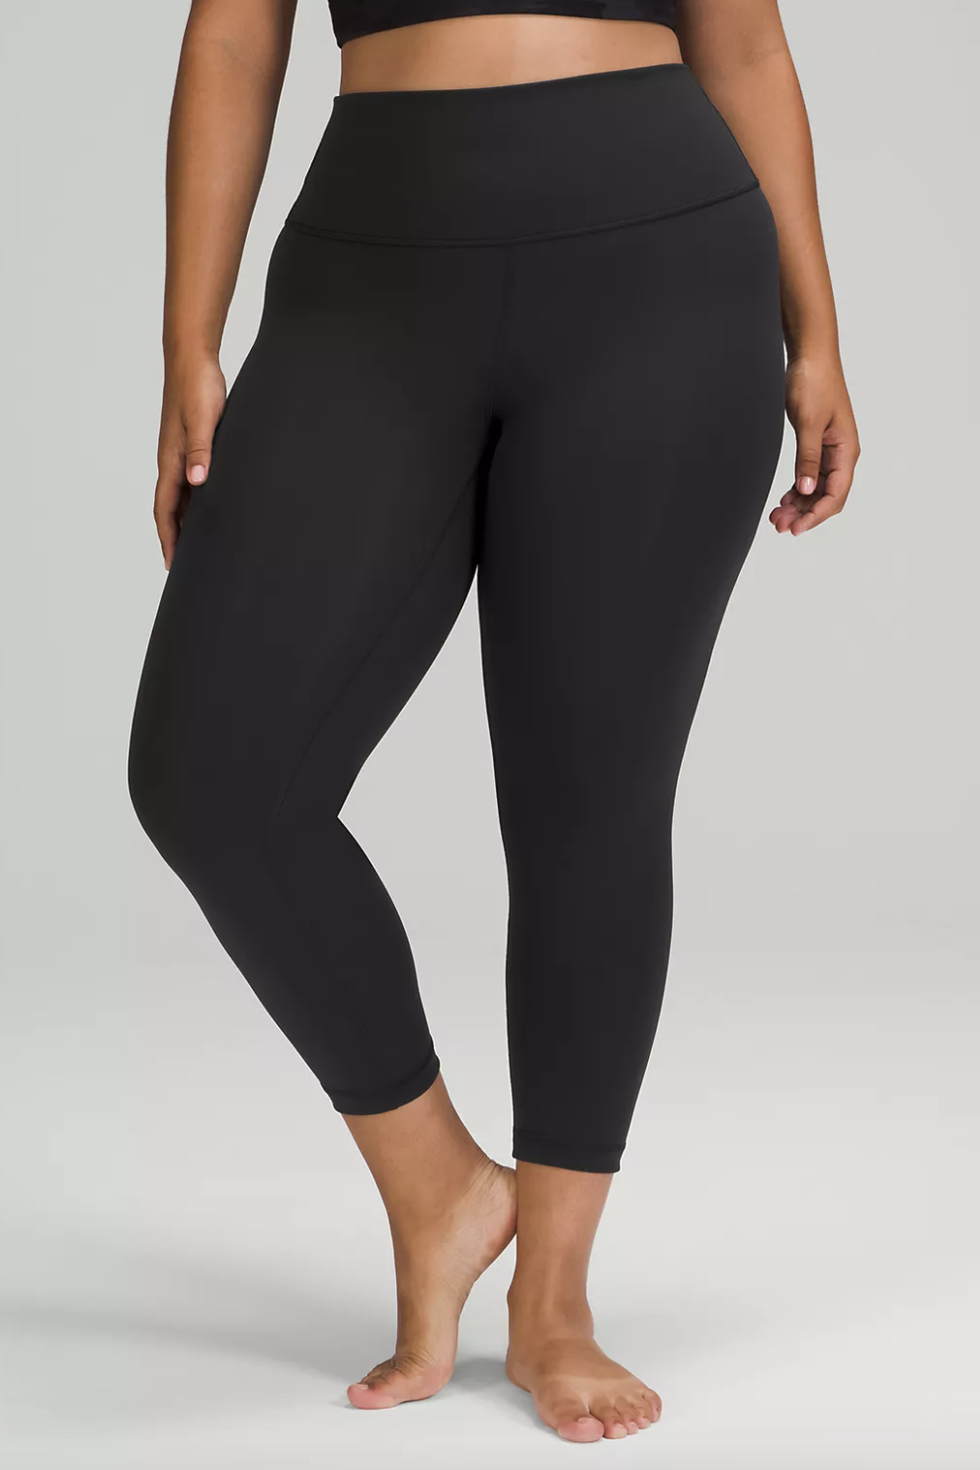 Best Deal for PERSIT Yoga Pants for Women with Pockets High Waisted Black